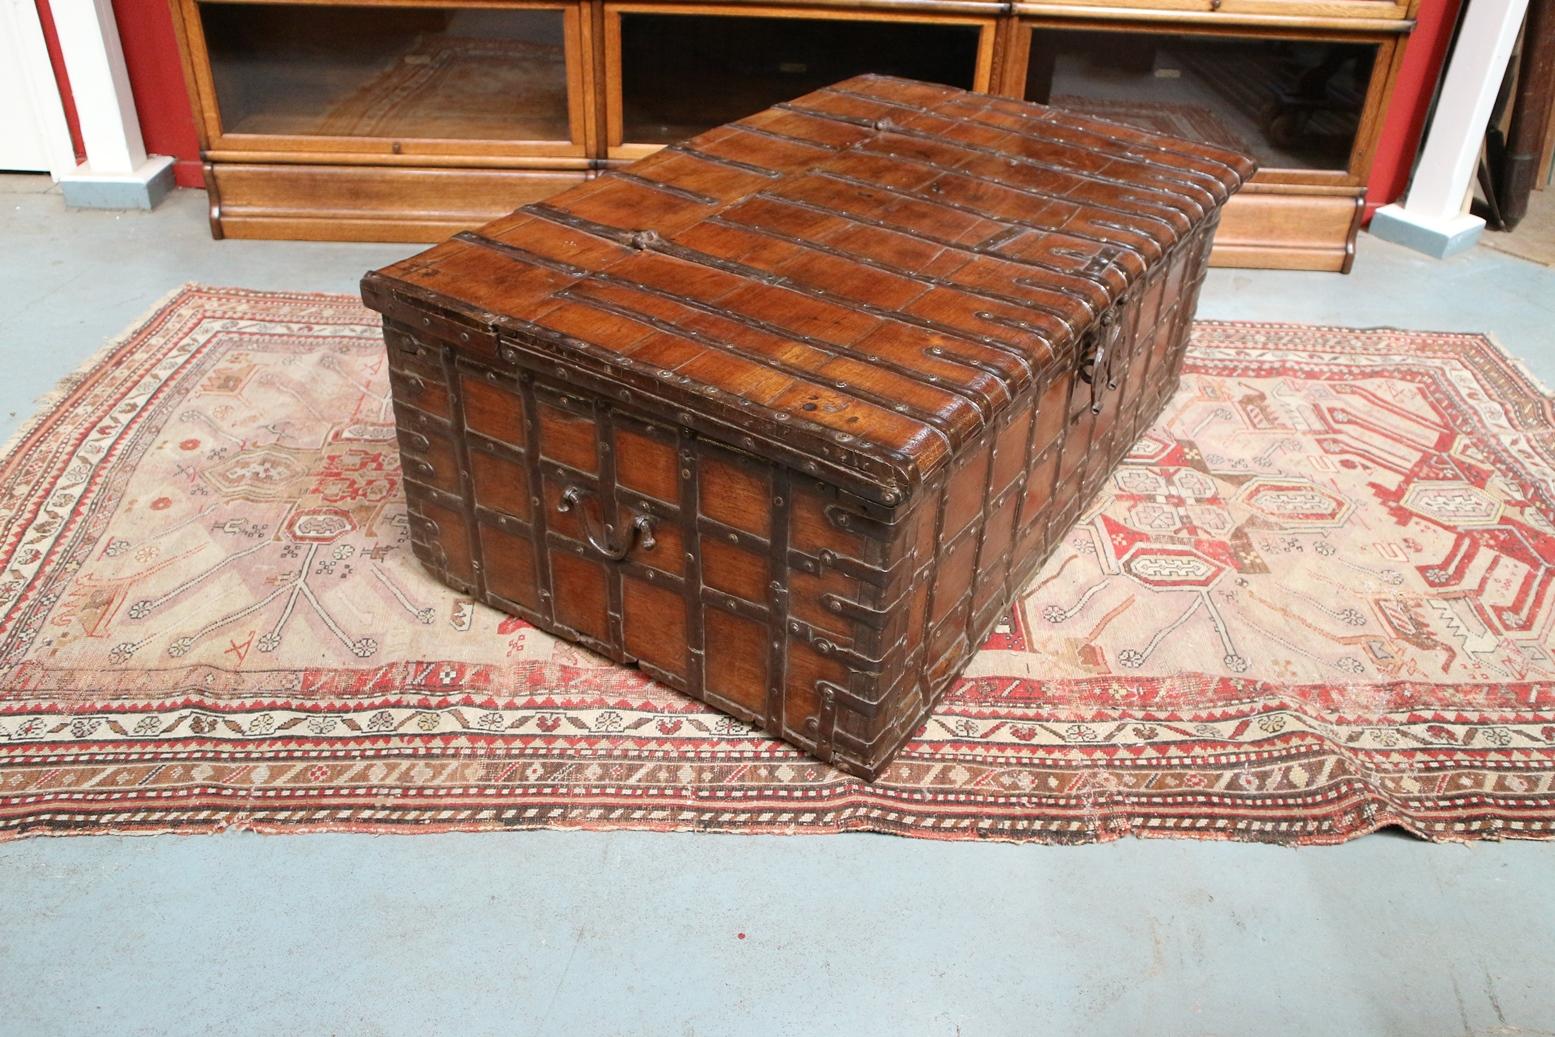 British Colonial 19th Century Anglo-Indian Teakwood Box or Coffee Table